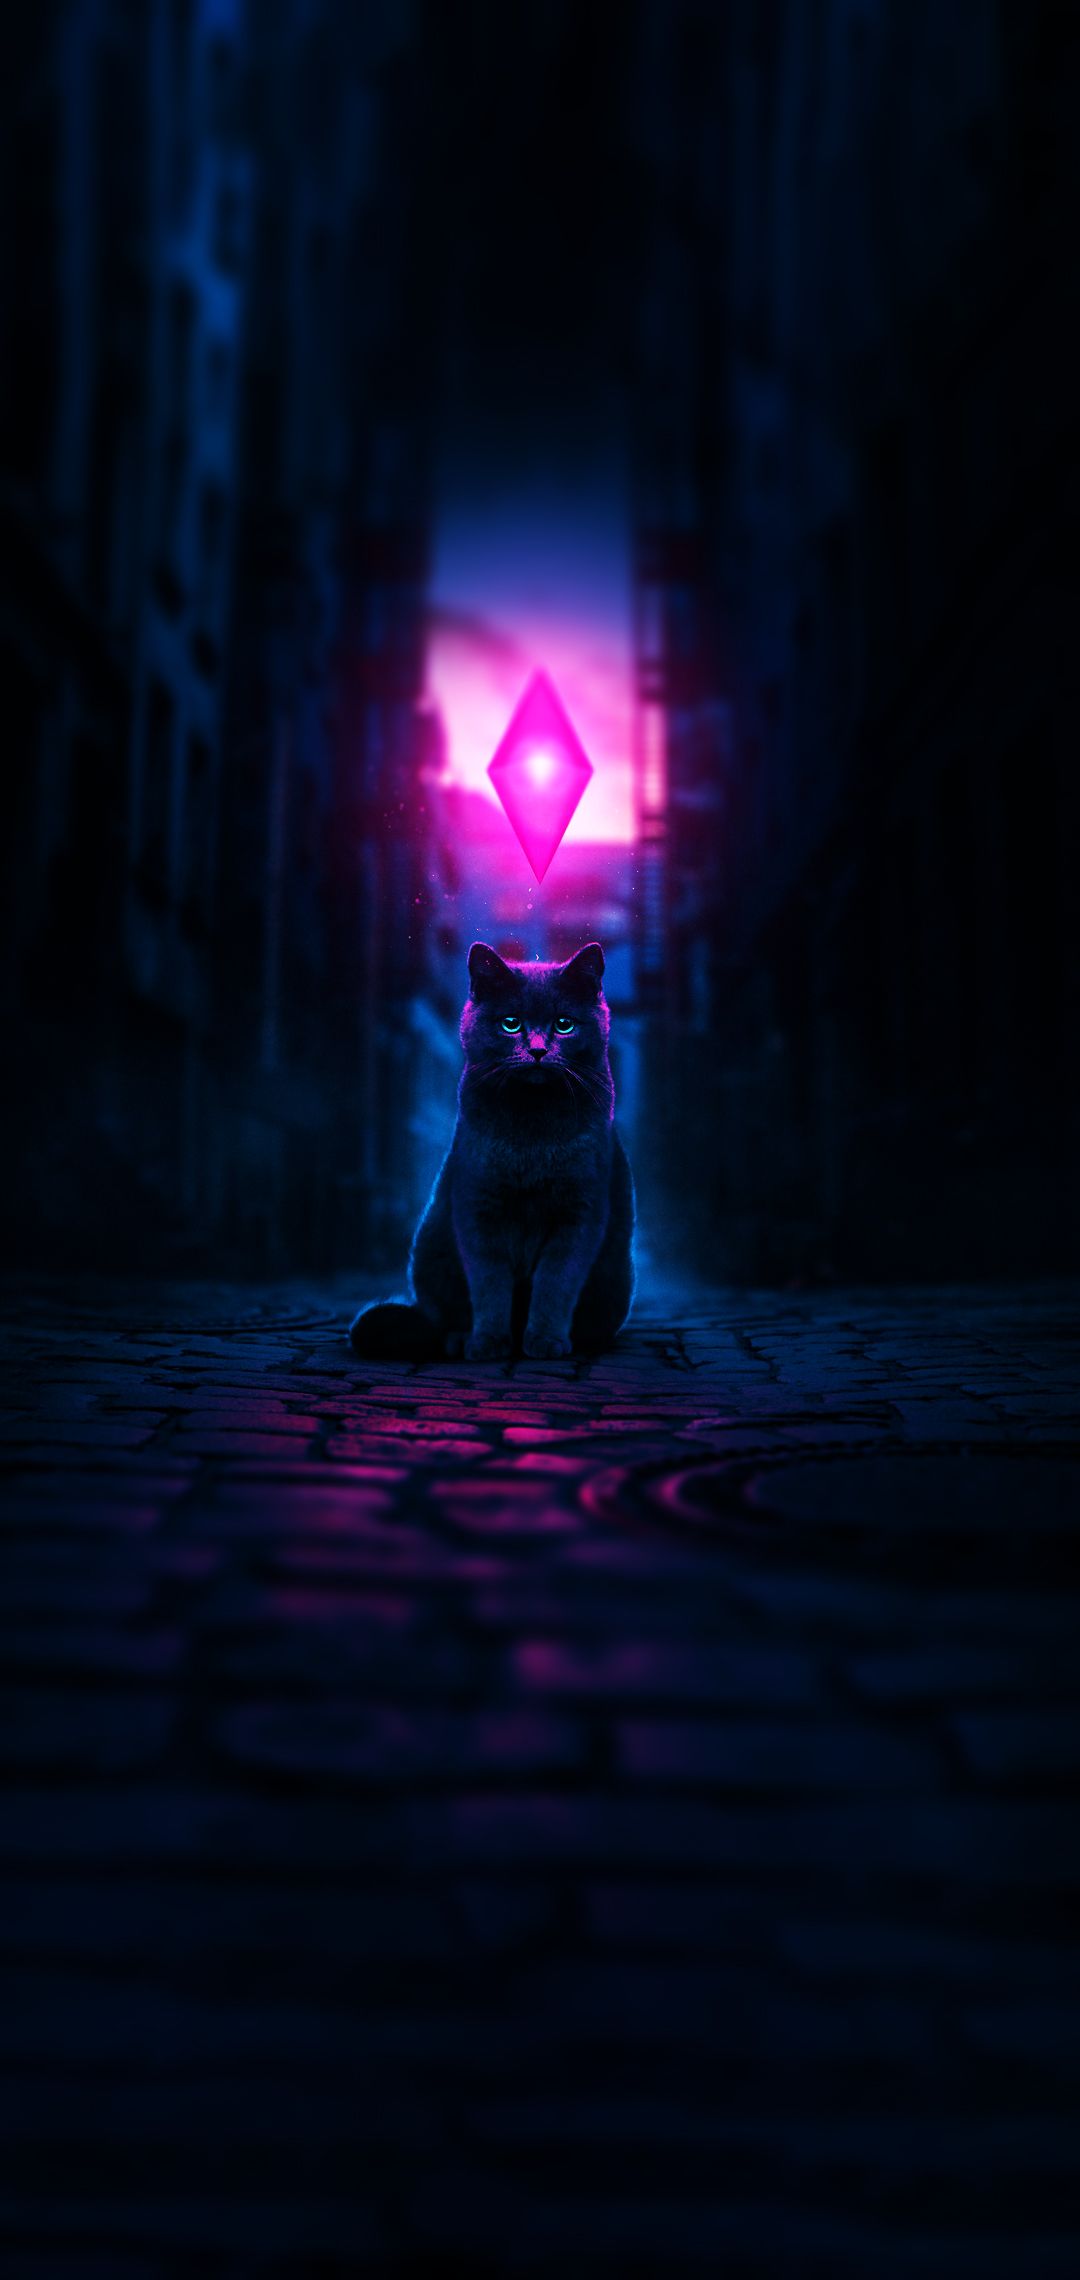 A cat sitting in the middle of an alley - Cat